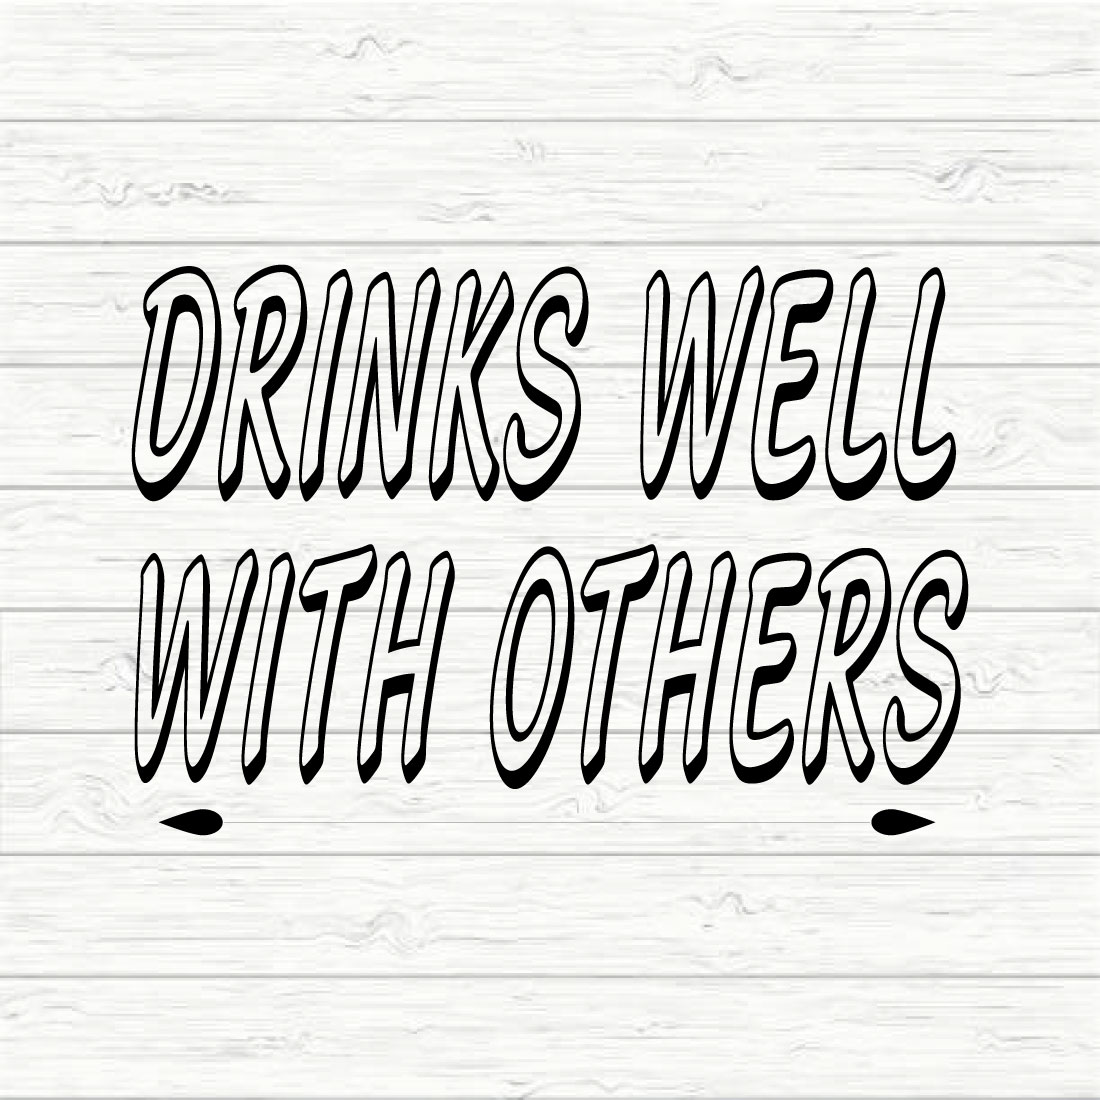 Drinks Well With Others preview image.